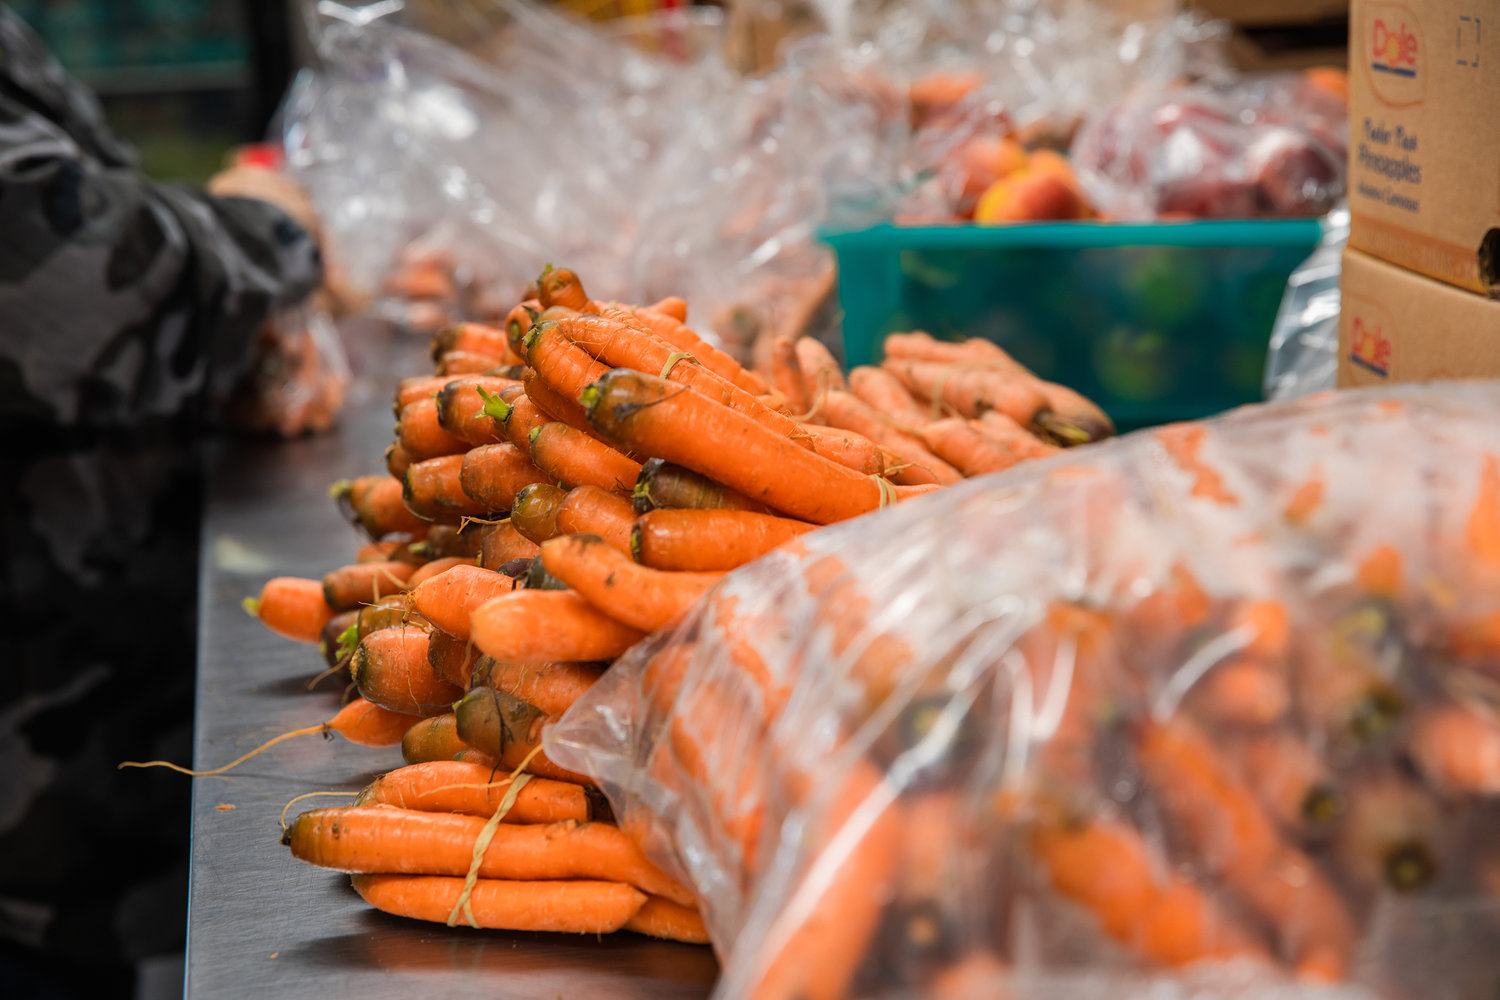 Carrots are organized into bags for meals by volunteers at Tenino Food Bank Plus Monday morning.